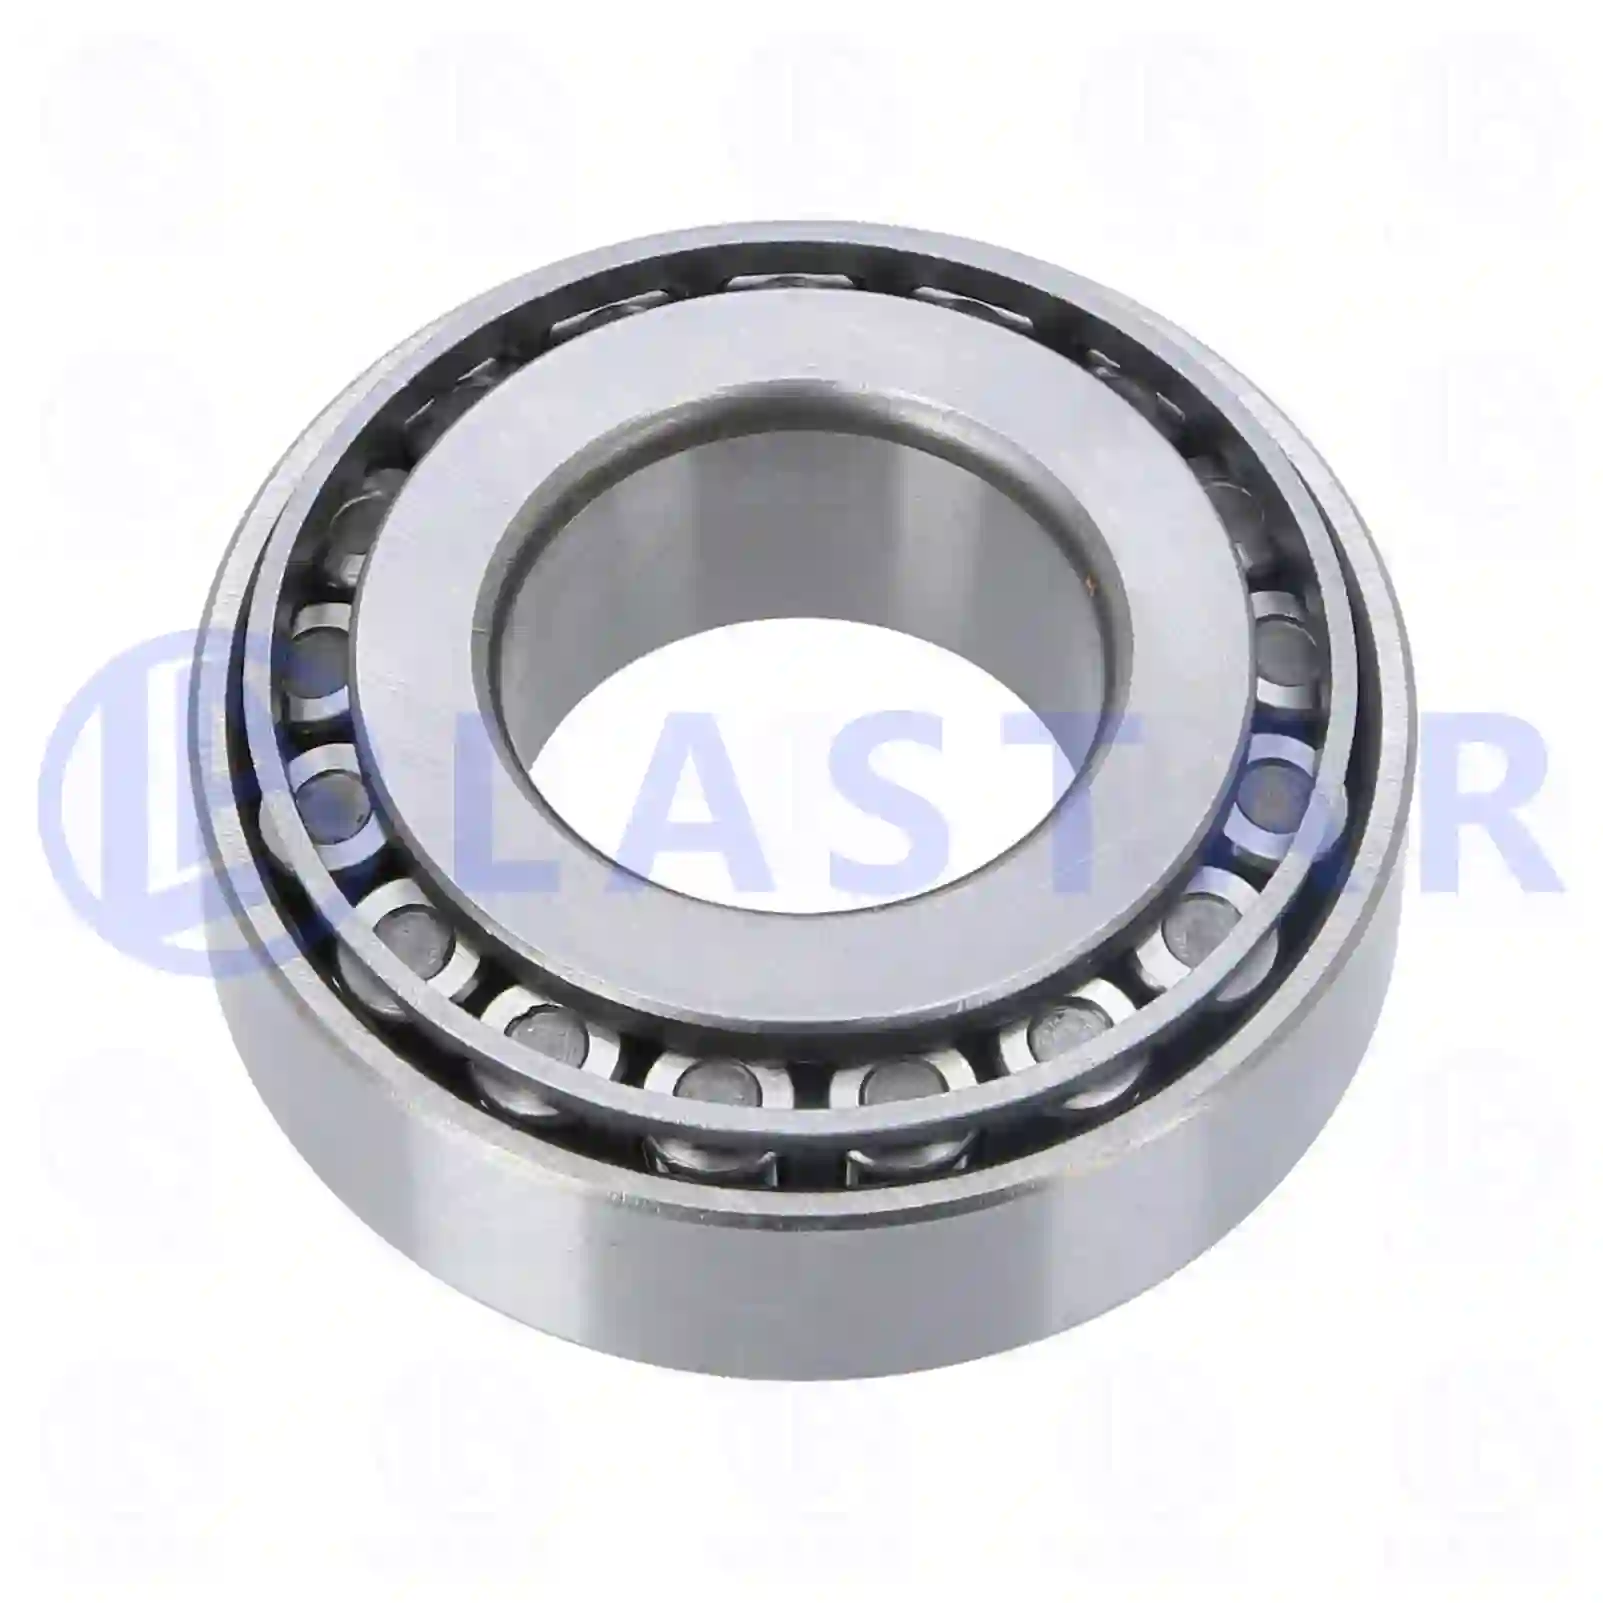 Tapered roller bearing, 77724607, 0264053500, MA111370, MB025345, MB035007, MB393956, 15919, 005092244, 1440637X1, TK004209923, TK4209923, 12337579, 94032099, 94248083, 988435105, 988435105A, 988435109, 988435109A, SZ36635005, 91007-P5D-007, 91007-PY4-003, 53232-11000, 8-12337579-0, 8-94248083-0, 8-94248083-1, 9-00093172-0, 26800130, 00221-27210, 06324990068, 06324990079, 81934200064, 87523300200, A0773220700, 022127141, 0221271410, 022127210, 055933075, 075527141, 000720032207, 0089817405, 0089817605, 2506263031, 250626303101, 3199810005, MA111370, MB0025345, MB025345, MB035007, MB393956, 32219-9X501, 40210-F3900, 0023432207, 0959232207, 0959532207, 5000388284, 5000388401, 5010241918, 5516010573, 7701465647, 7703090093, 202635, 183684, 19577, ZG02971-0008 ||  77724607 Lastar Spare Part | Truck Spare Parts, Auotomotive Spare Parts Tapered roller bearing, 77724607, 0264053500, MA111370, MB025345, MB035007, MB393956, 15919, 005092244, 1440637X1, TK004209923, TK4209923, 12337579, 94032099, 94248083, 988435105, 988435105A, 988435109, 988435109A, SZ36635005, 91007-P5D-007, 91007-PY4-003, 53232-11000, 8-12337579-0, 8-94248083-0, 8-94248083-1, 9-00093172-0, 26800130, 00221-27210, 06324990068, 06324990079, 81934200064, 87523300200, A0773220700, 022127141, 0221271410, 022127210, 055933075, 075527141, 000720032207, 0089817405, 0089817605, 2506263031, 250626303101, 3199810005, MA111370, MB0025345, MB025345, MB035007, MB393956, 32219-9X501, 40210-F3900, 0023432207, 0959232207, 0959532207, 5000388284, 5000388401, 5010241918, 5516010573, 7701465647, 7703090093, 202635, 183684, 19577, ZG02971-0008 ||  77724607 Lastar Spare Part | Truck Spare Parts, Auotomotive Spare Parts